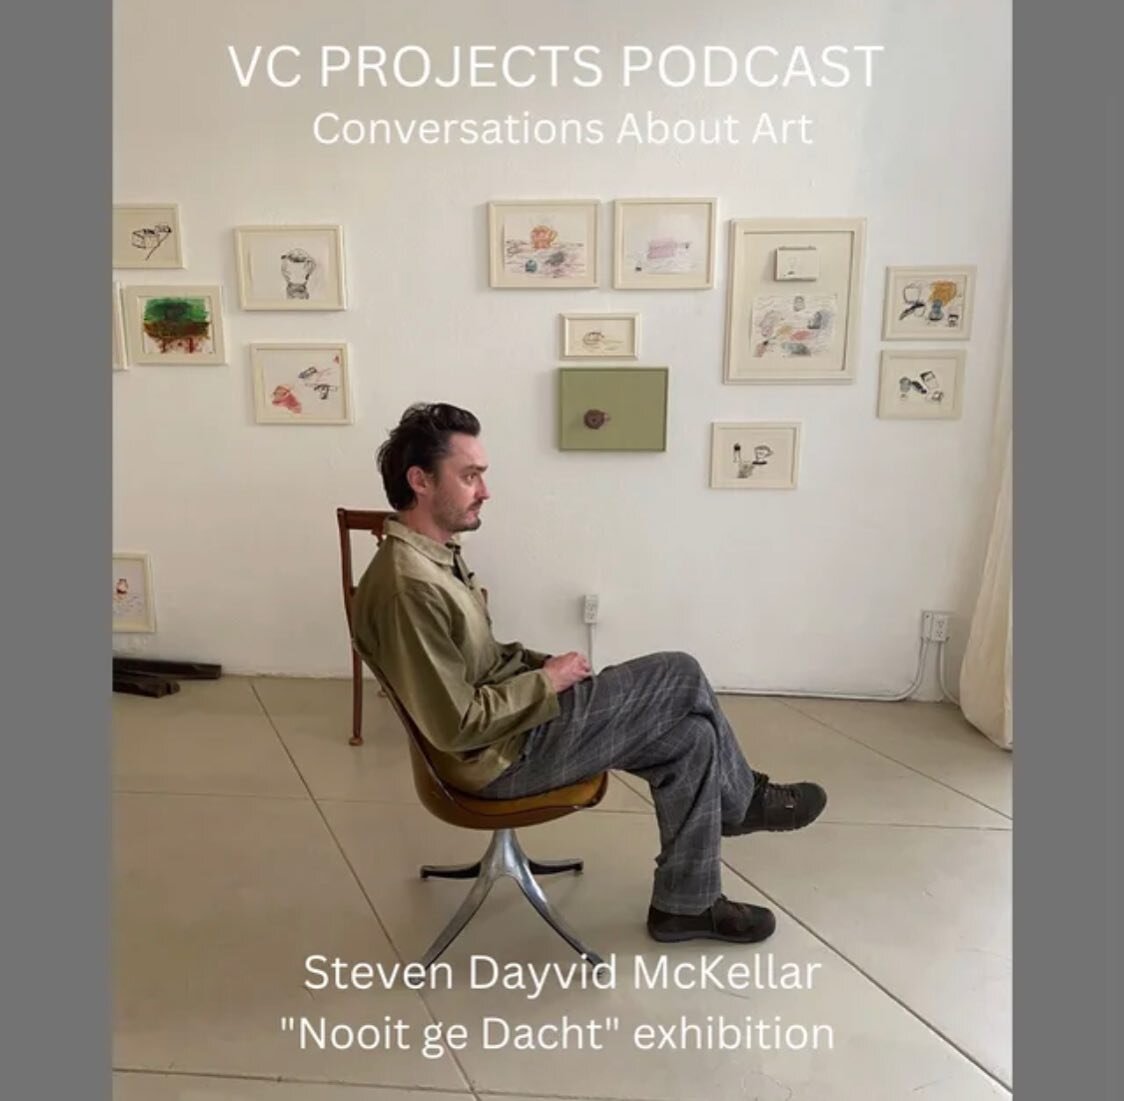 In this episode, we speak to Steven Dayvid McKellar, a musician, painter,&nbsp;and poet from Cape Town, South Africa. After a 20-year music career, touring globally with his band, Civil Twilight, Steven began releasing his first solo records and retu